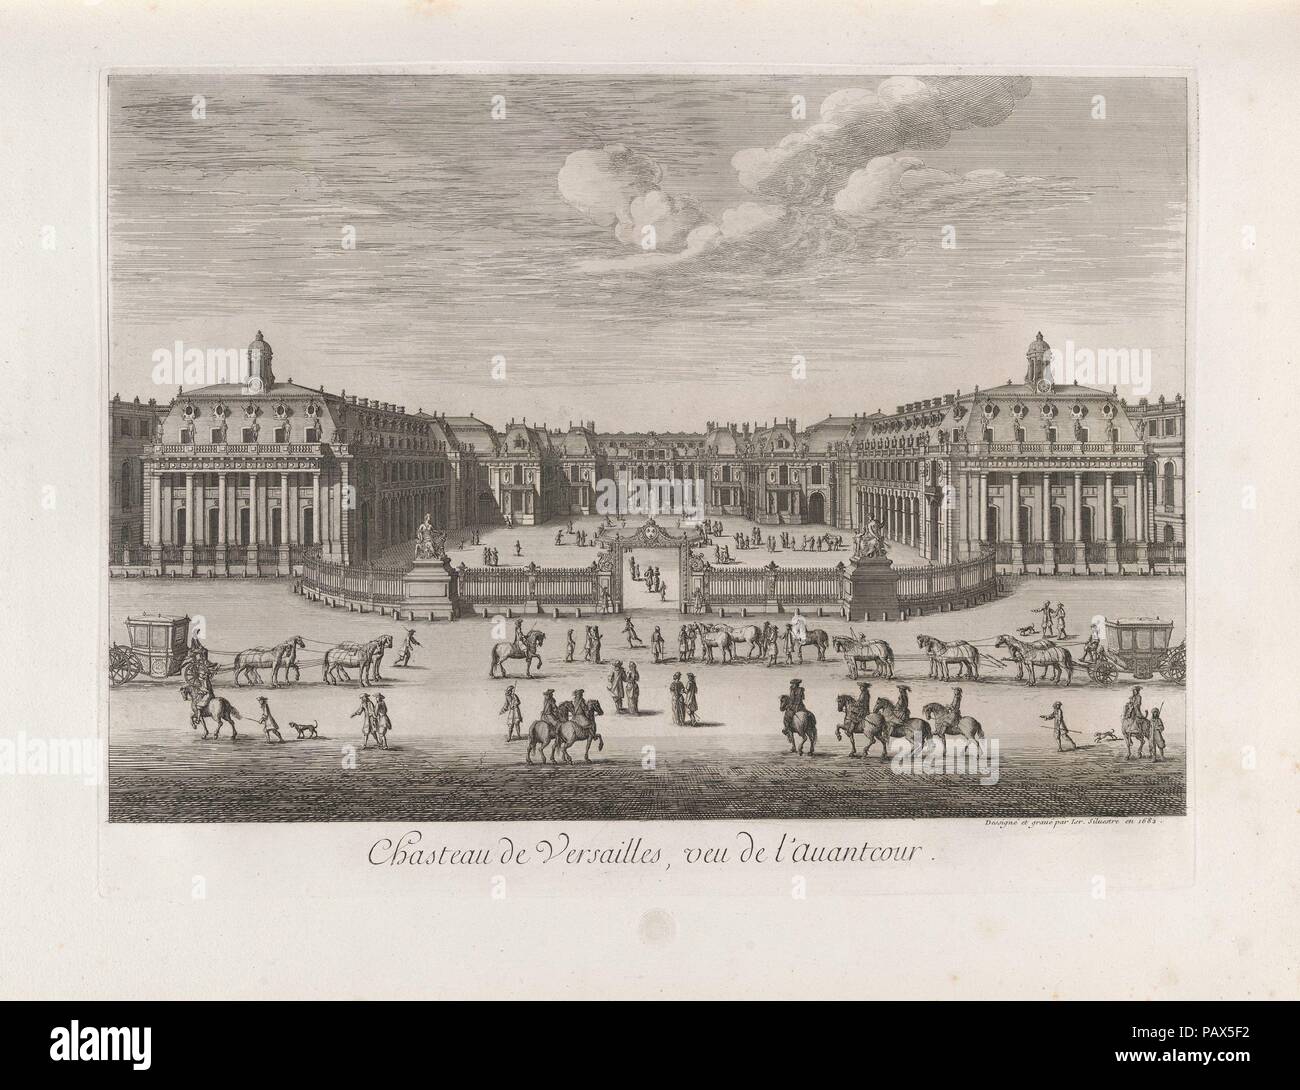 Château de Versailles seen from the forecourt, from Chalcographie du Louvre, Vol. 22. Artist: Israel Silvestre (French, Nancy 1621-1691 Paris). Dimensions: Plate: 14 15/16 x 19 13/16 in. (38 x 50.4 cm)  Sheet: 19 5/16 x 26 3/8 in. (49 x 67 cm). Date: 1682.  This engraving, showing the facade of the palace with its marble court and forecourt, dates to 1682, the year Louis XIV officially moved his court from Paris to Versailles. Museum: Metropolitan Museum of Art, New York, USA. Stock Photo